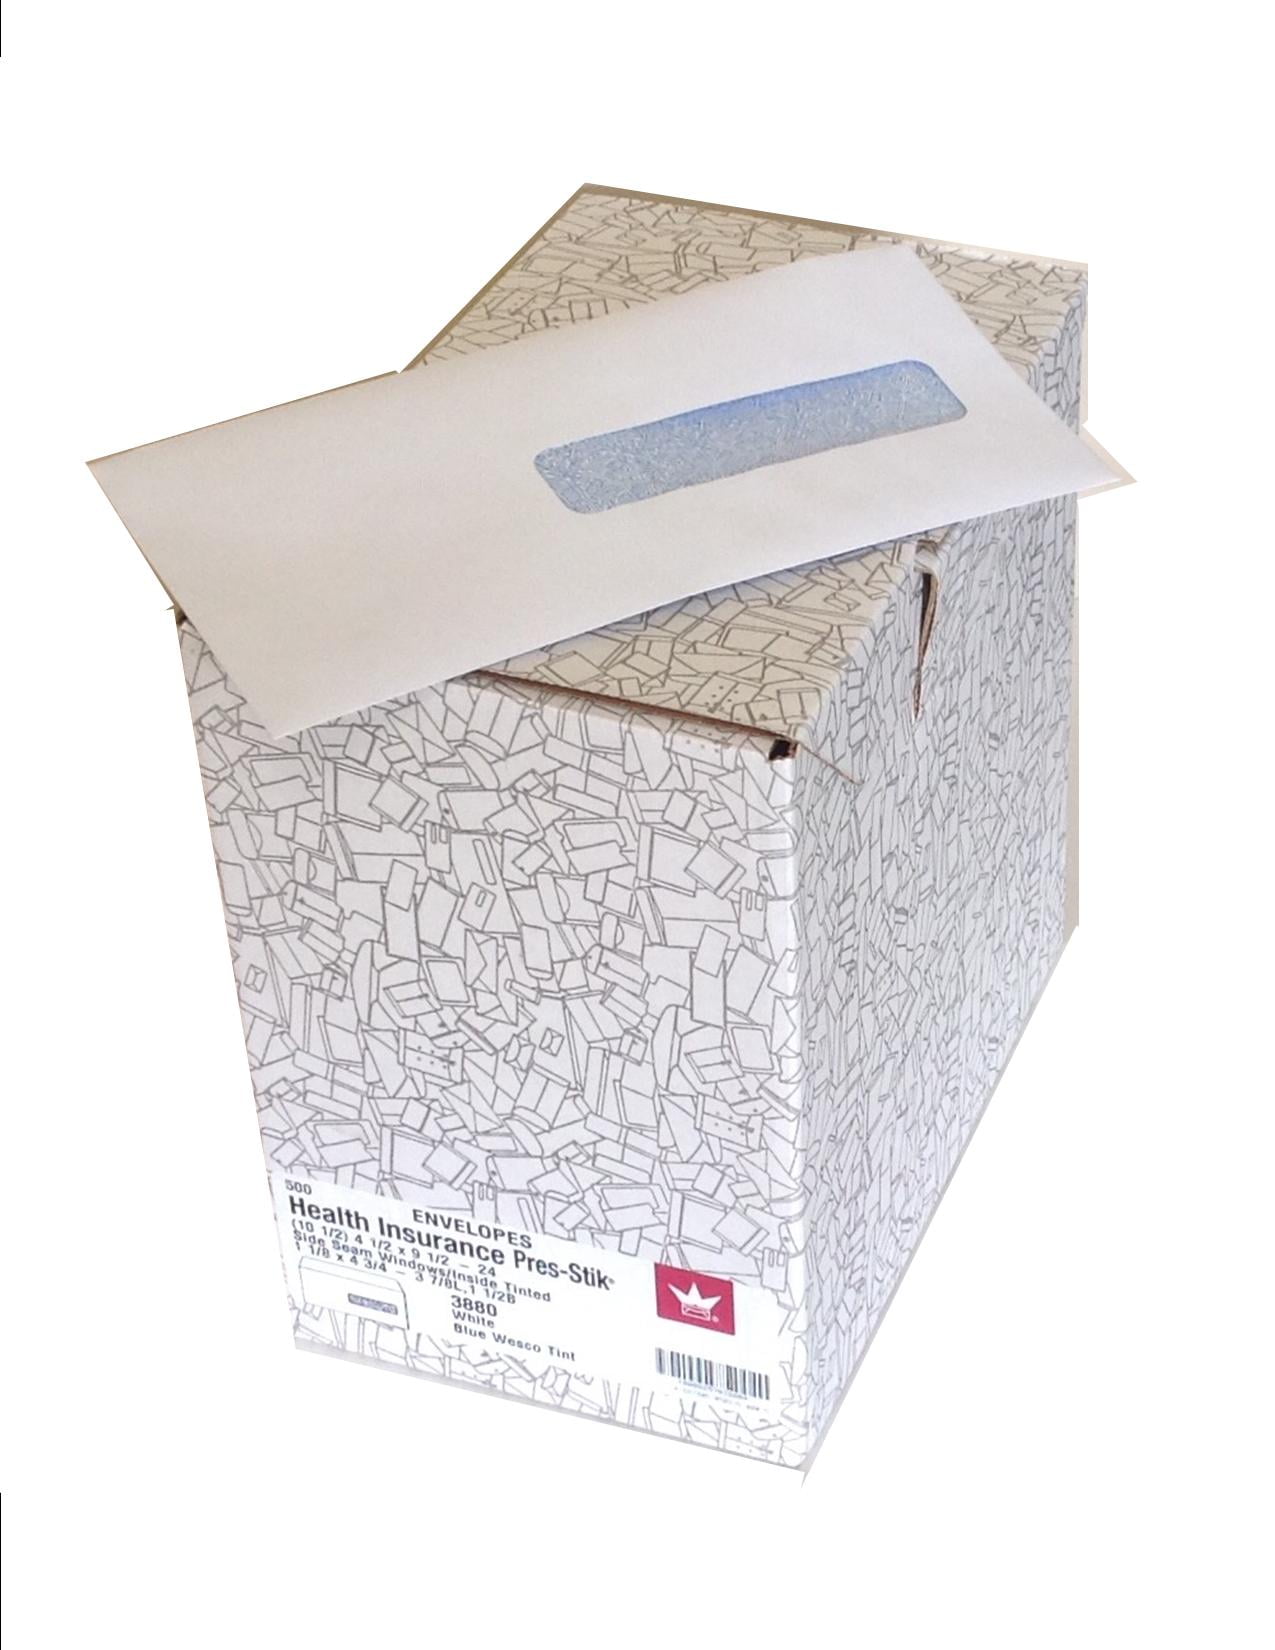 Self-Seal Closure~Right Window Envelope~ 9 x 13 Pack of 100 for Claim Insurance HCFA-1508 CMS-1500 Forms Security Envelopes